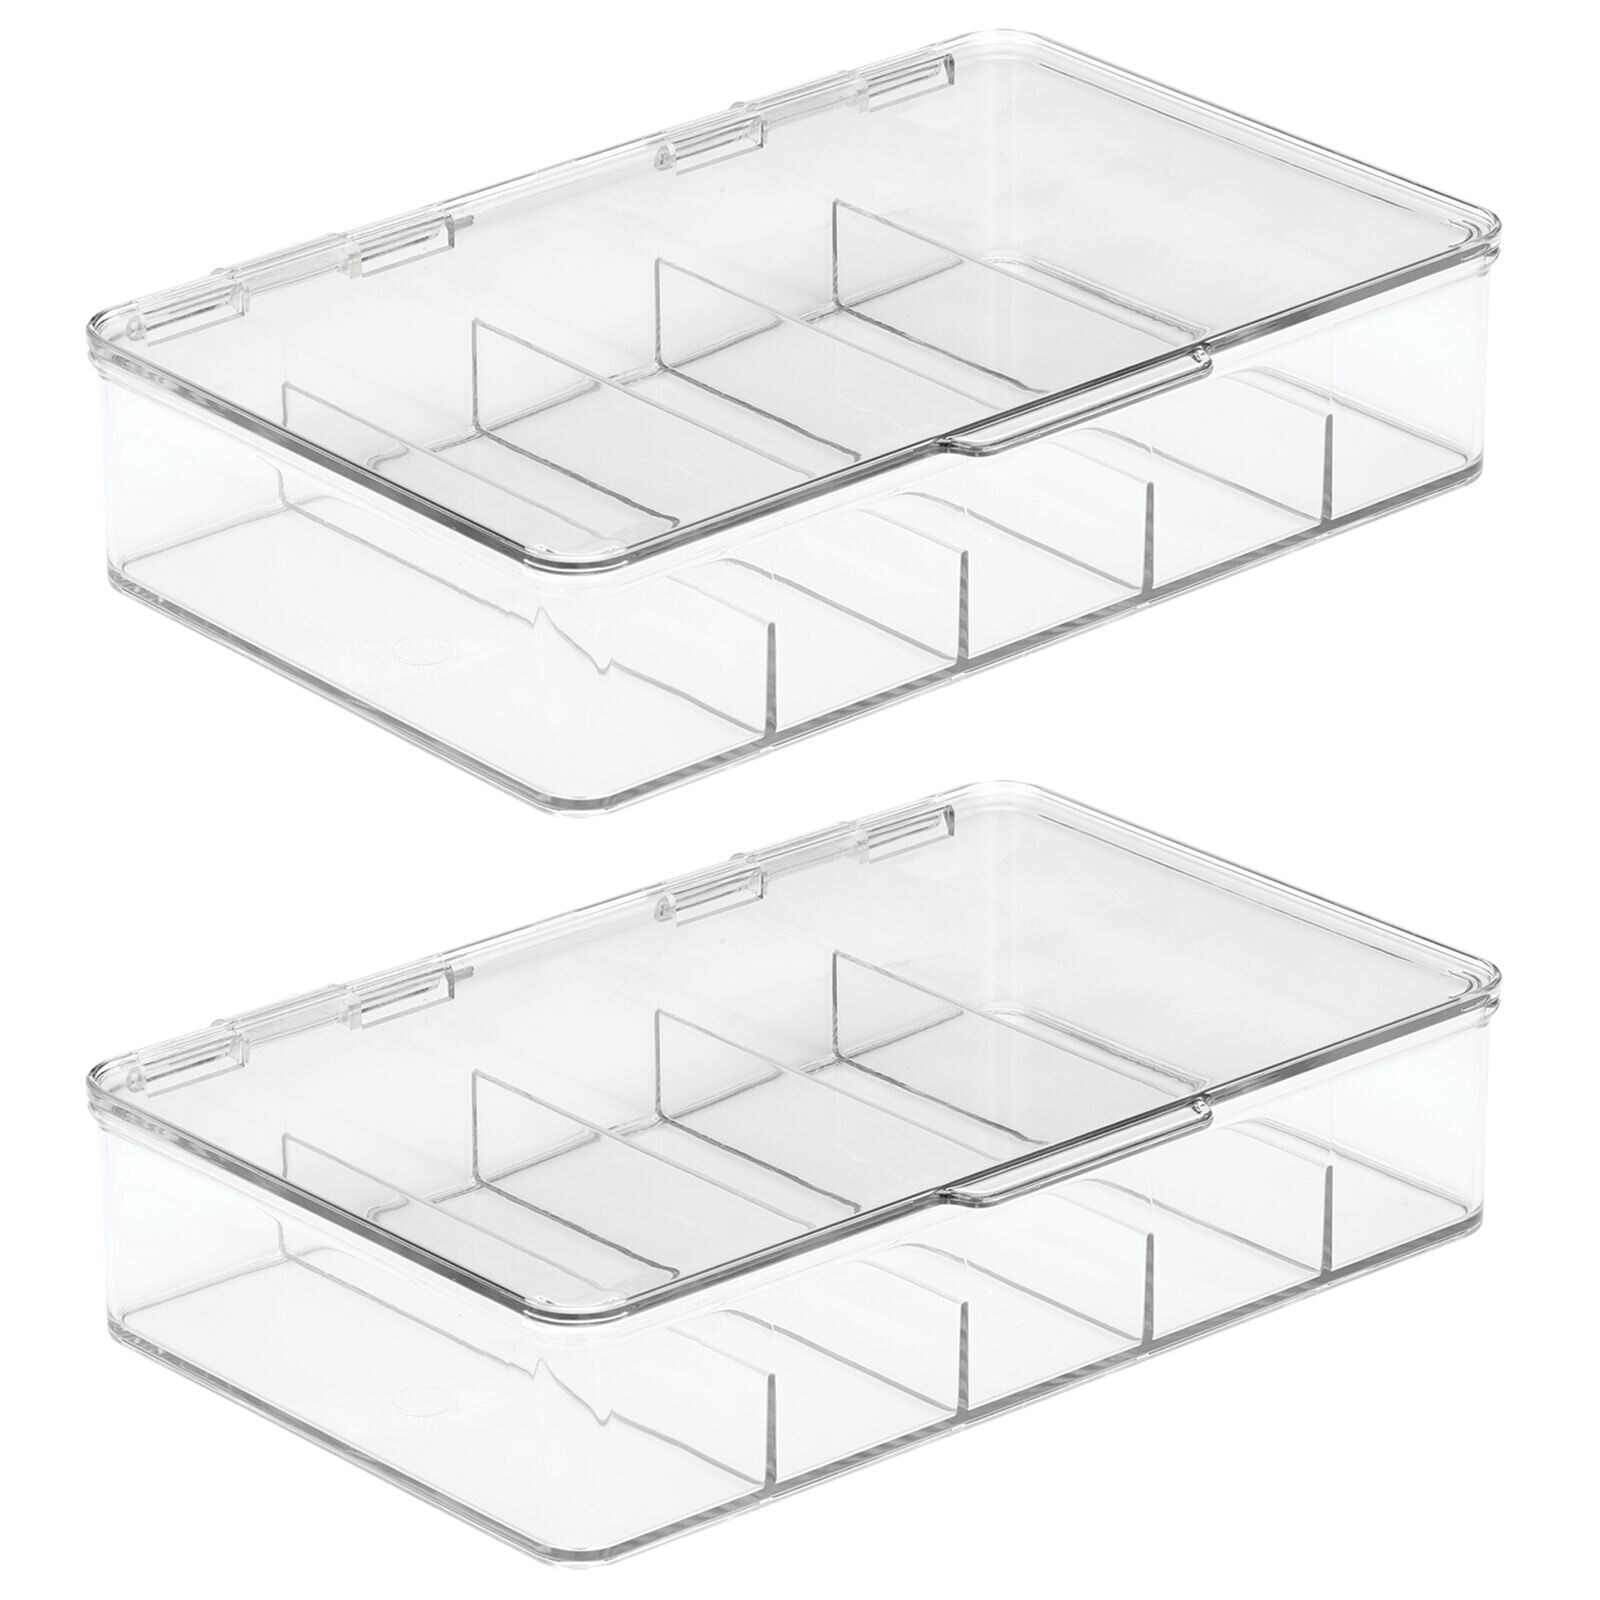 https://ak1.ostkcdn.com/images/products/is/images/direct/d3c73dbdd096ca1a92f45ef58ef90629d8fb0d35/mDesign-Plastic-Stackable-Eyeglass-Storage-Organizer%2C-5-Sections%2C-2-Pack---Clear.jpg